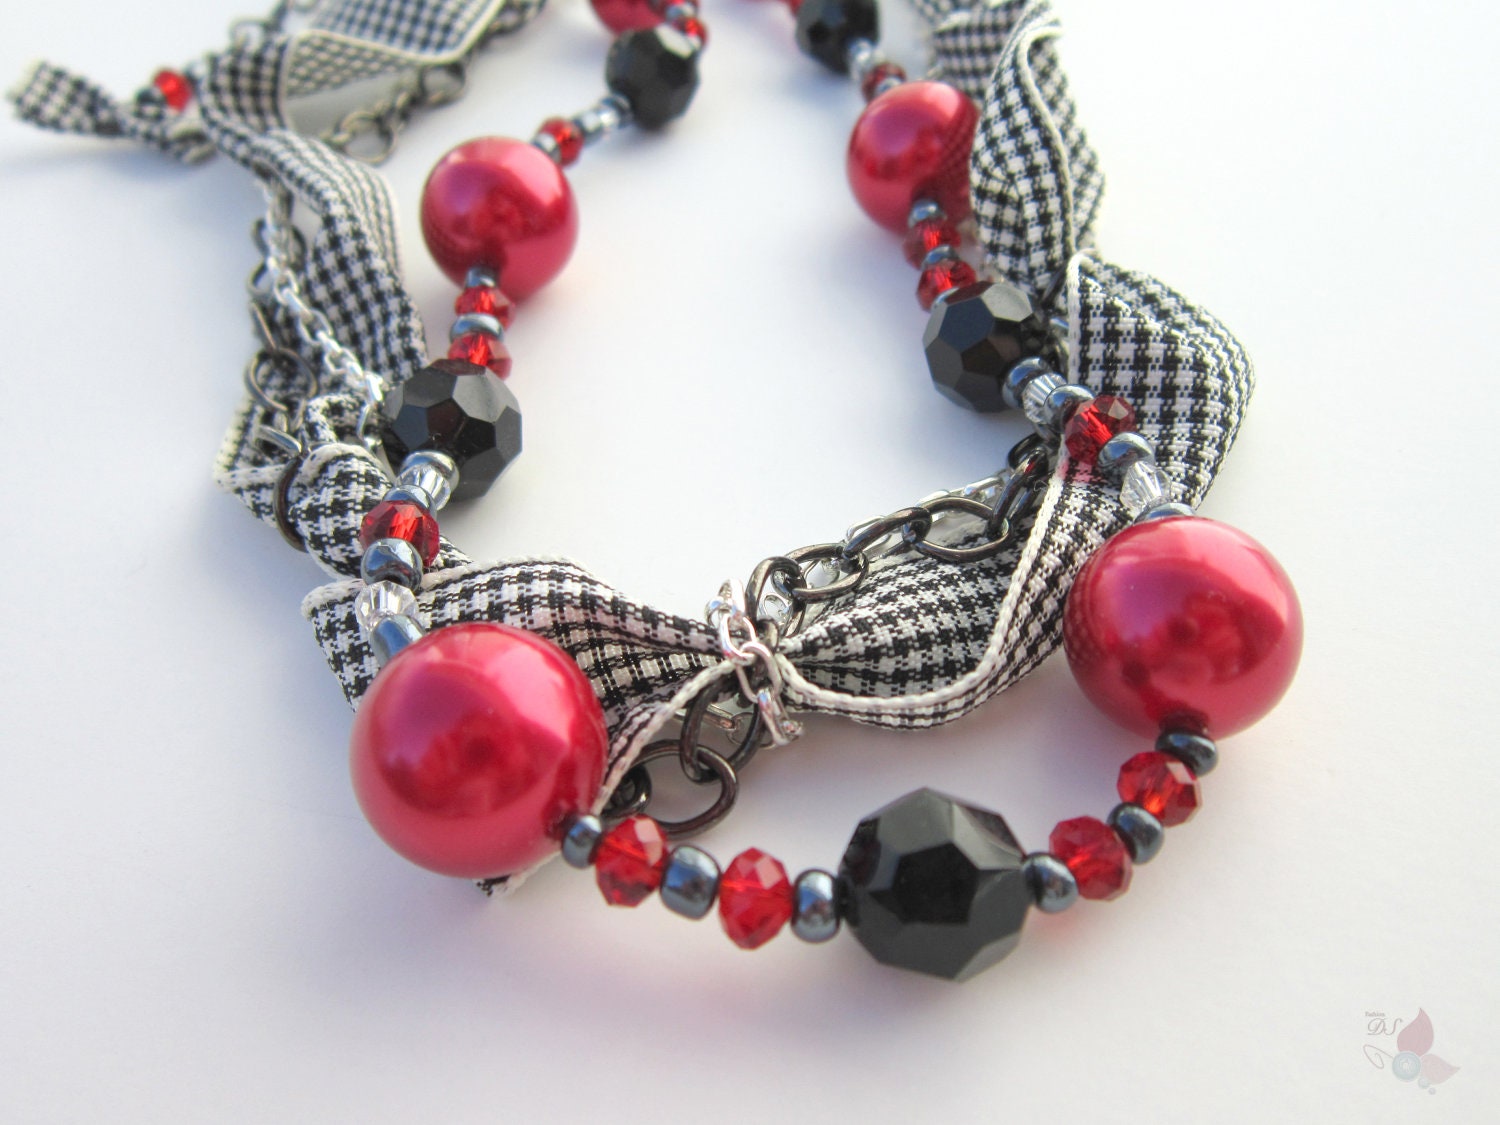 Necklace in Chains, Glass Pearls, Glass Beads, and Ribbon